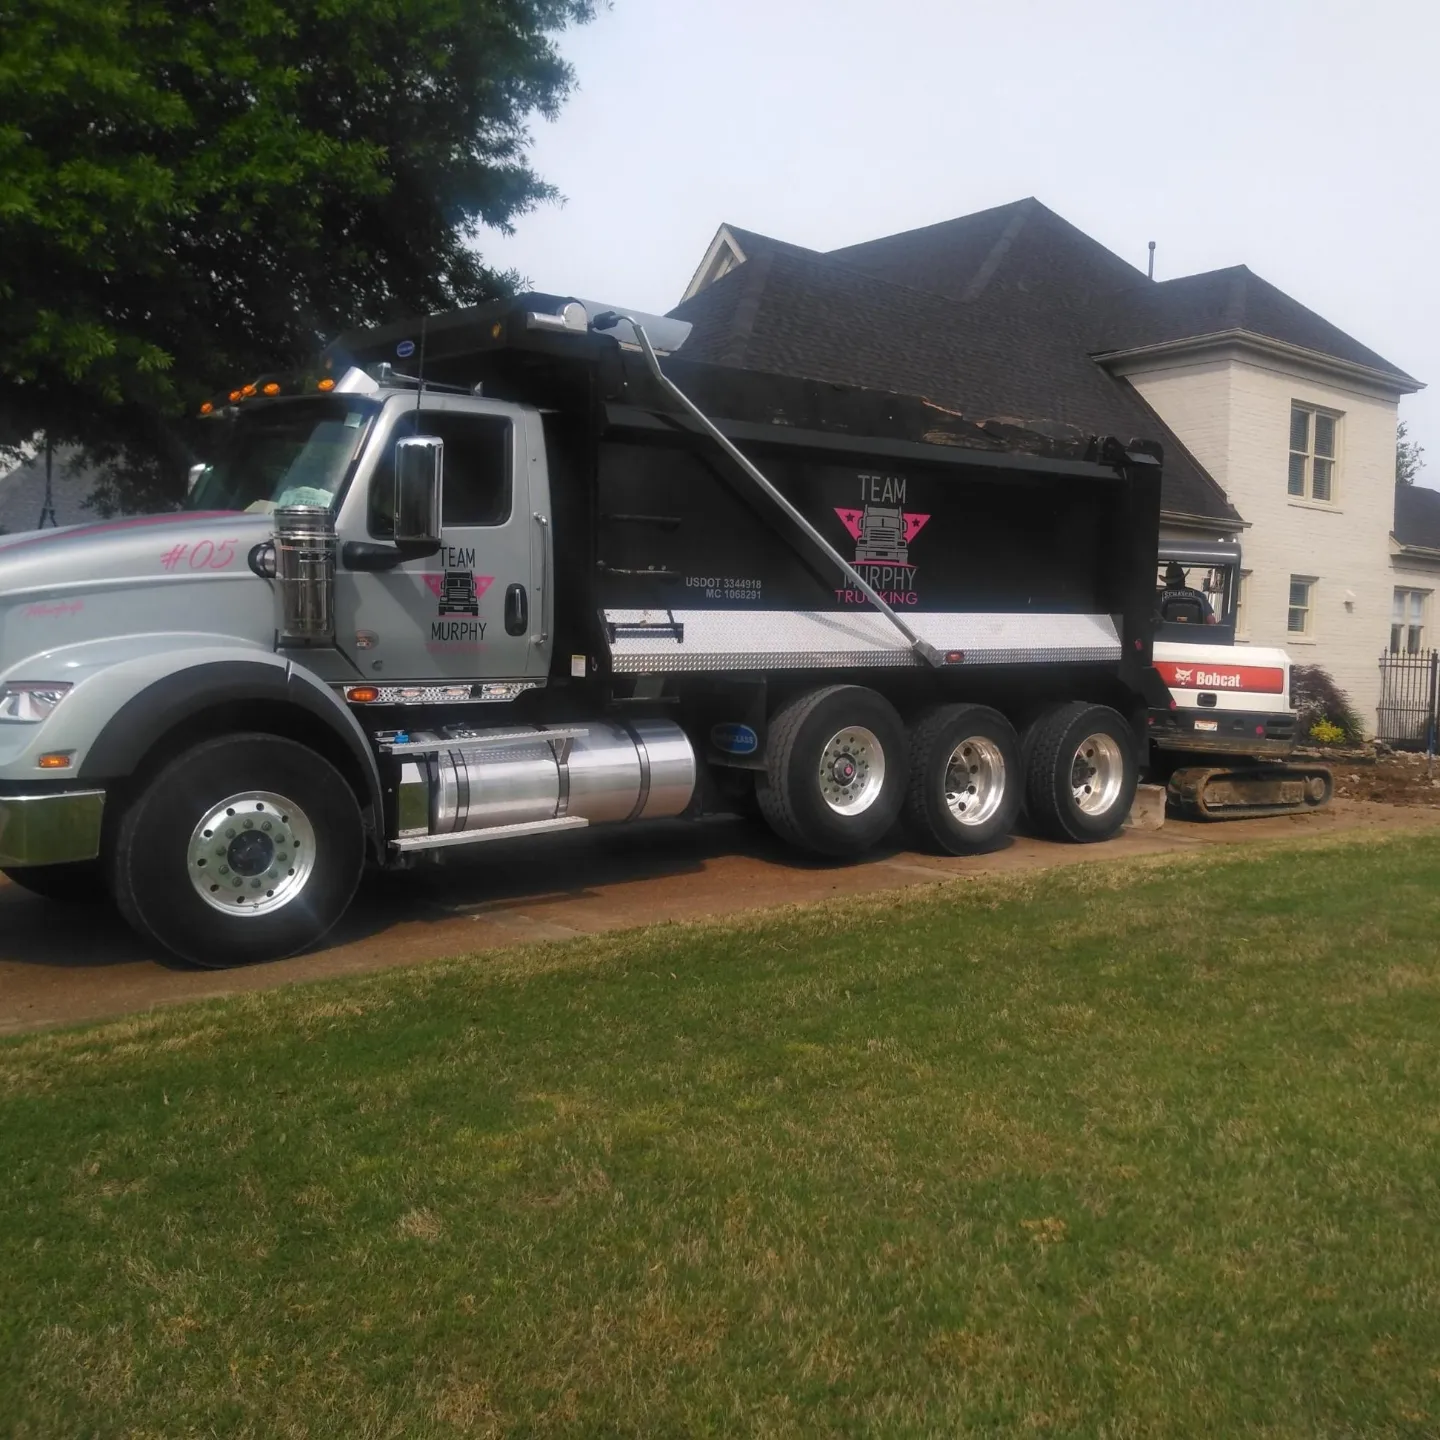 A large truck parked in front of a house.